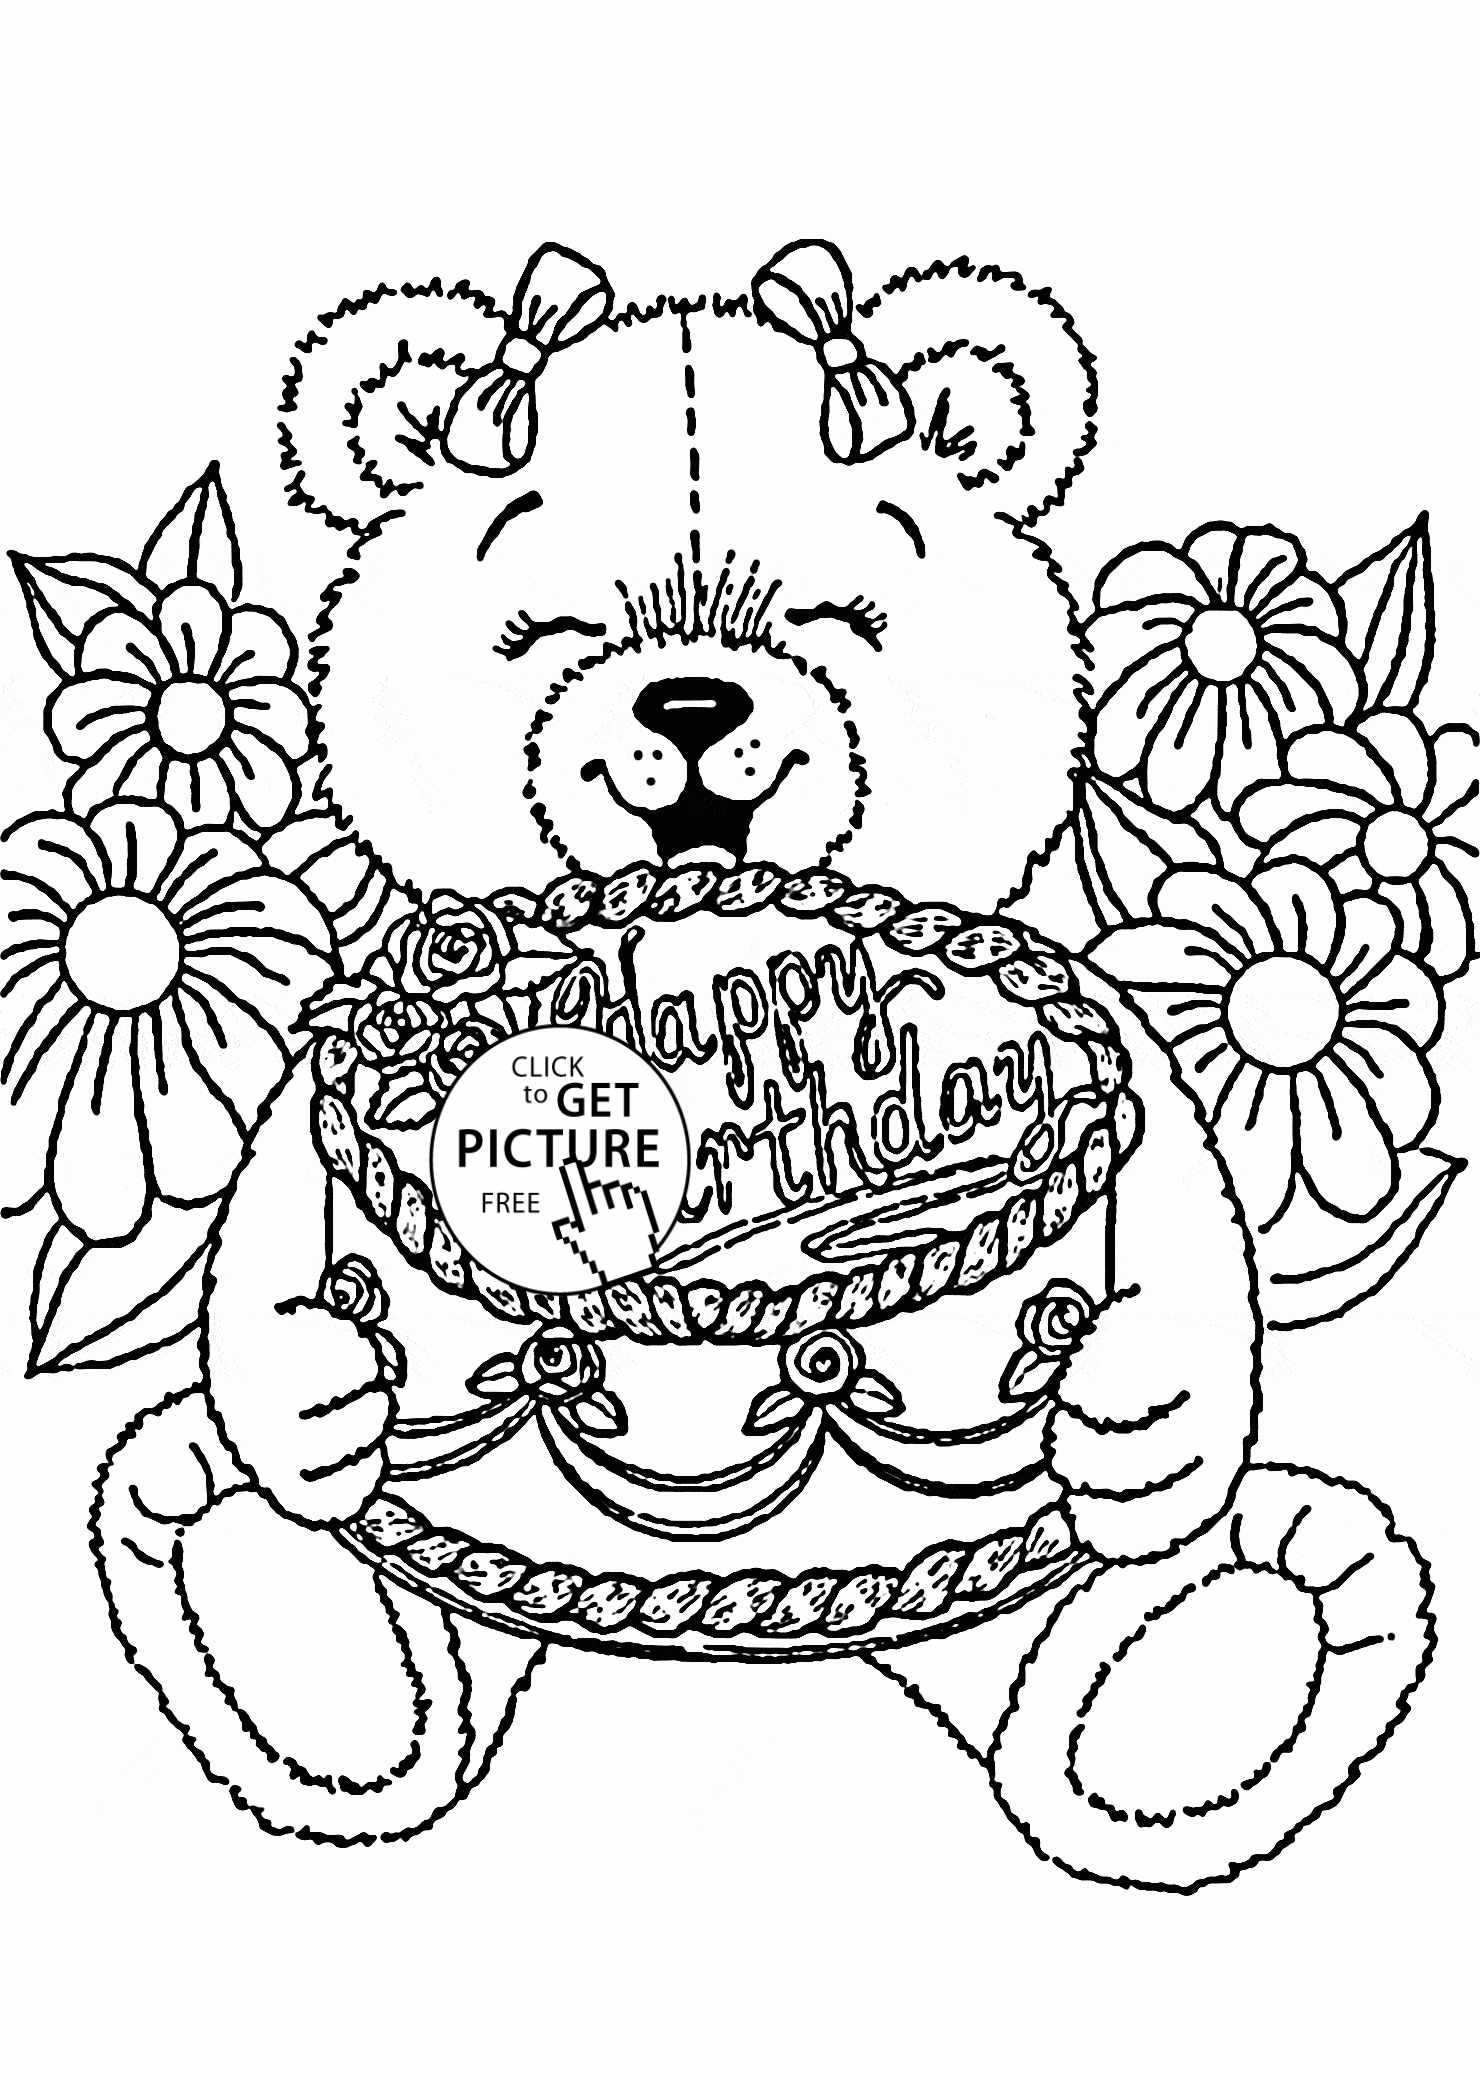 Teddy Bear Line Drawing at GetDrawings.com | Free for personal use